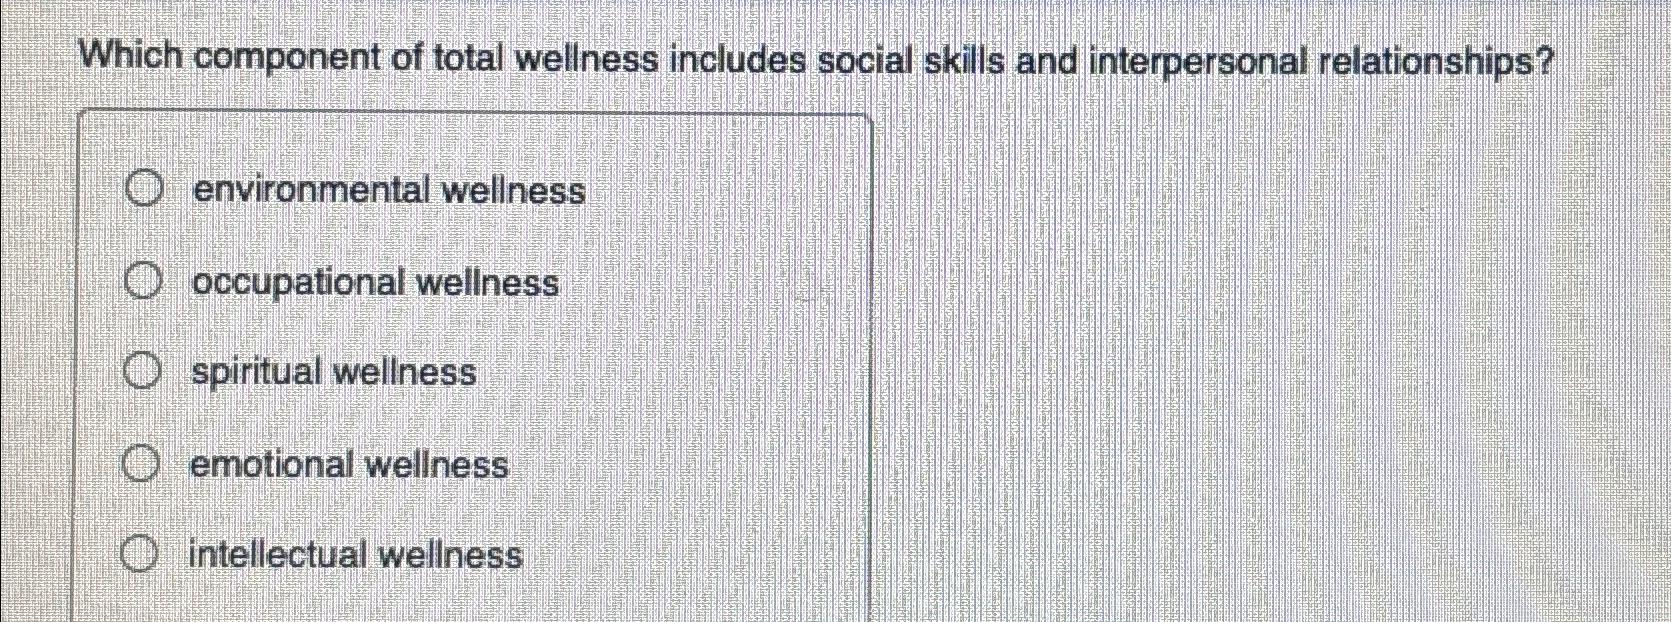 Which component of total wellness includes social skills and interpersonal relationships? O environmental